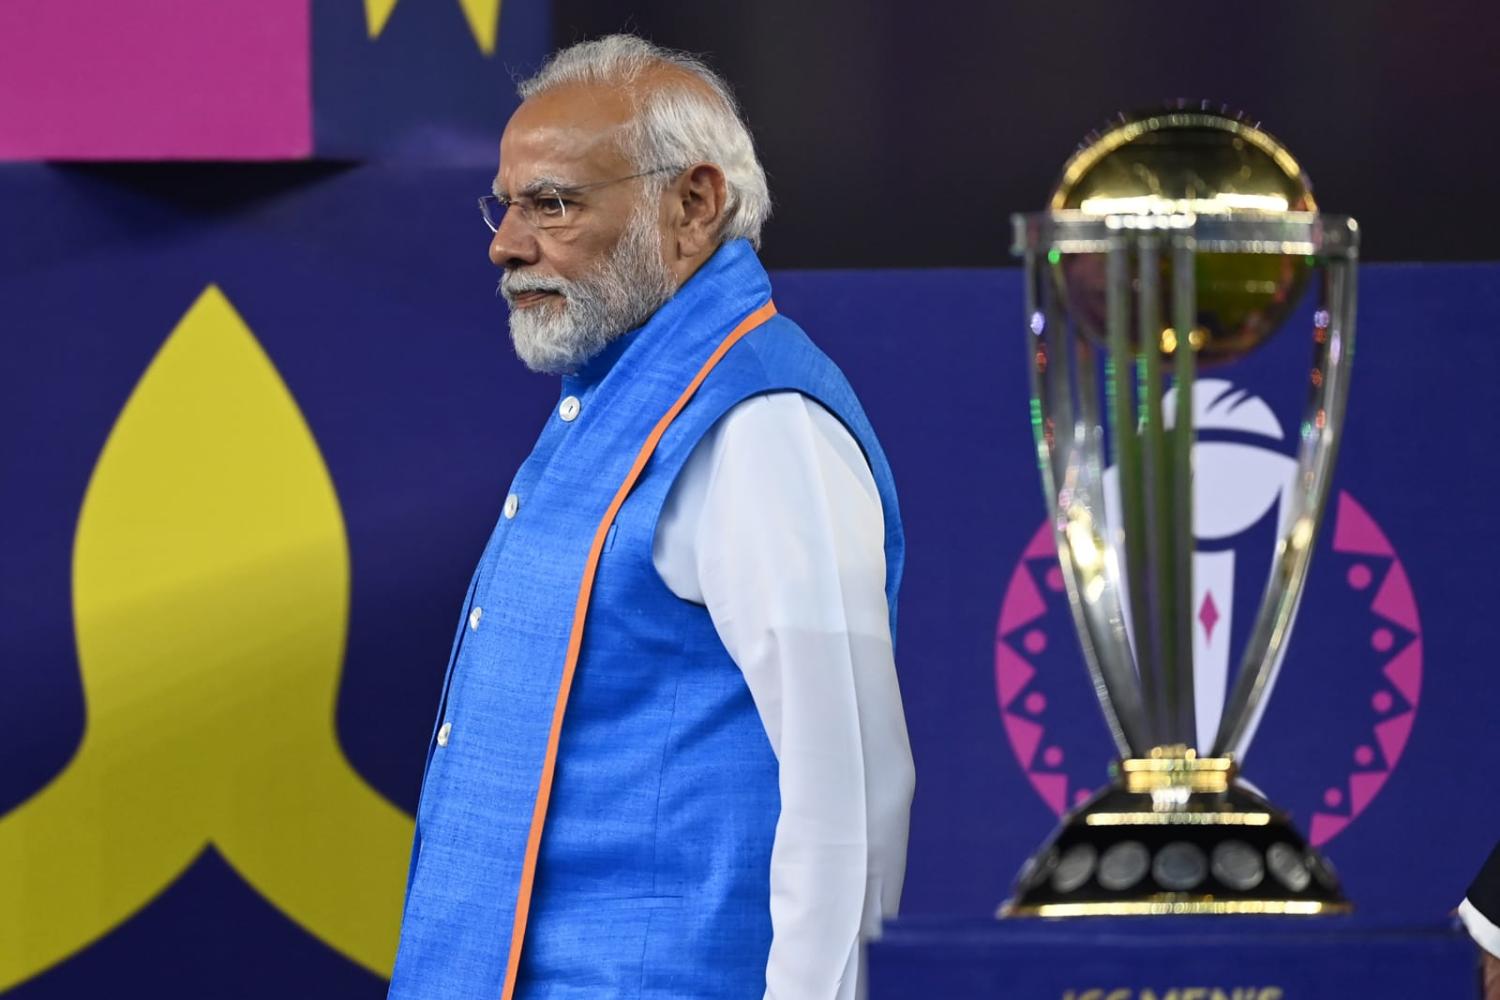 Narendra Modi, India's Prime Minister, passes the ICC Men's Cricket World Cup trophy during the presentation at Narendra Modi Stadium on 19 November, Ahmedabad, India (Gareth Copley/Getty Images)